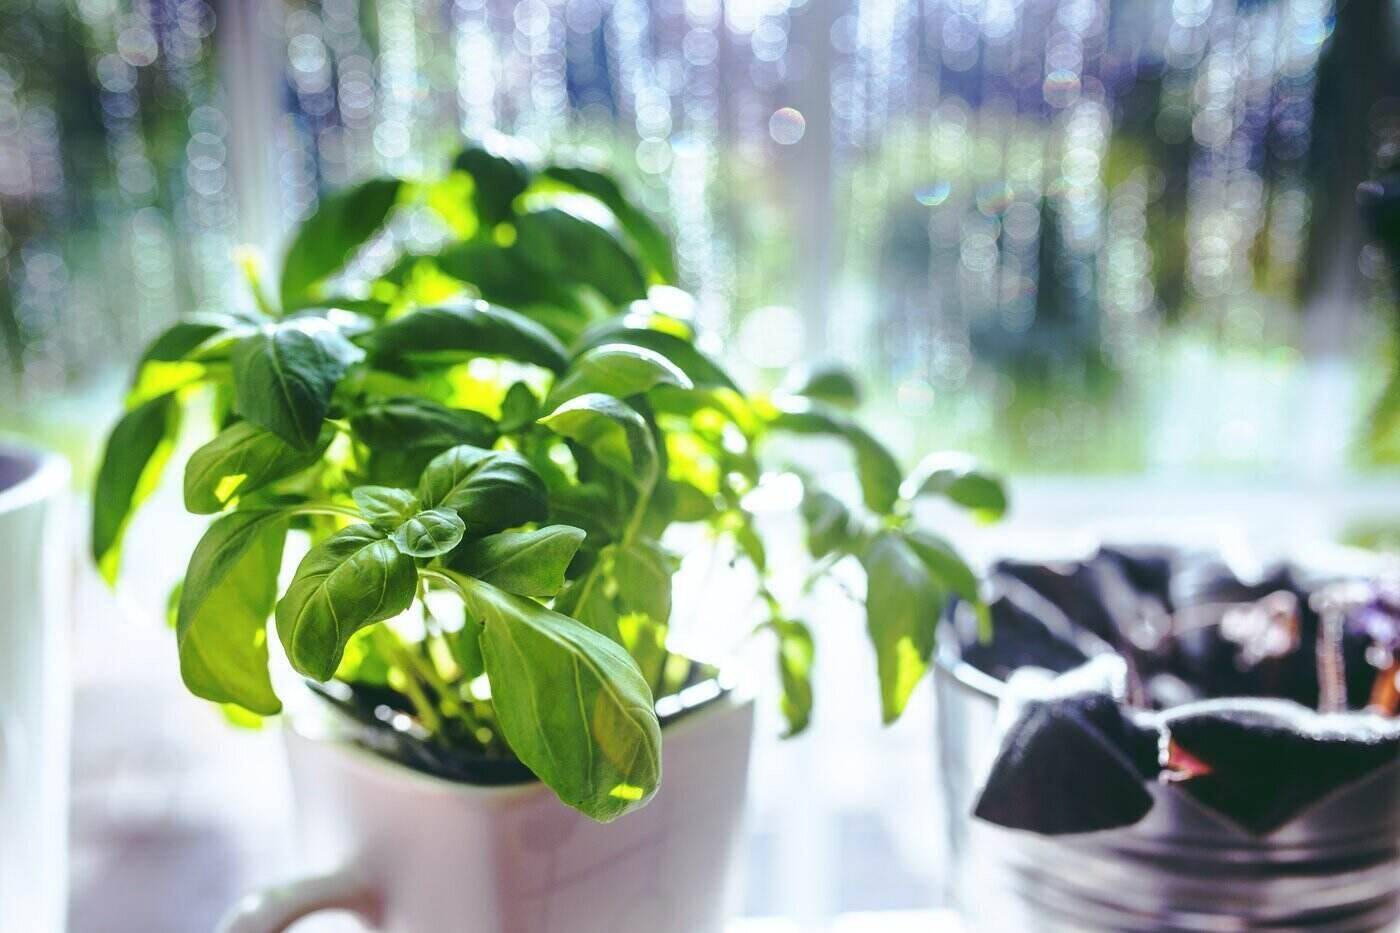 basil growing in mug by window - protecting trees and plants from winter